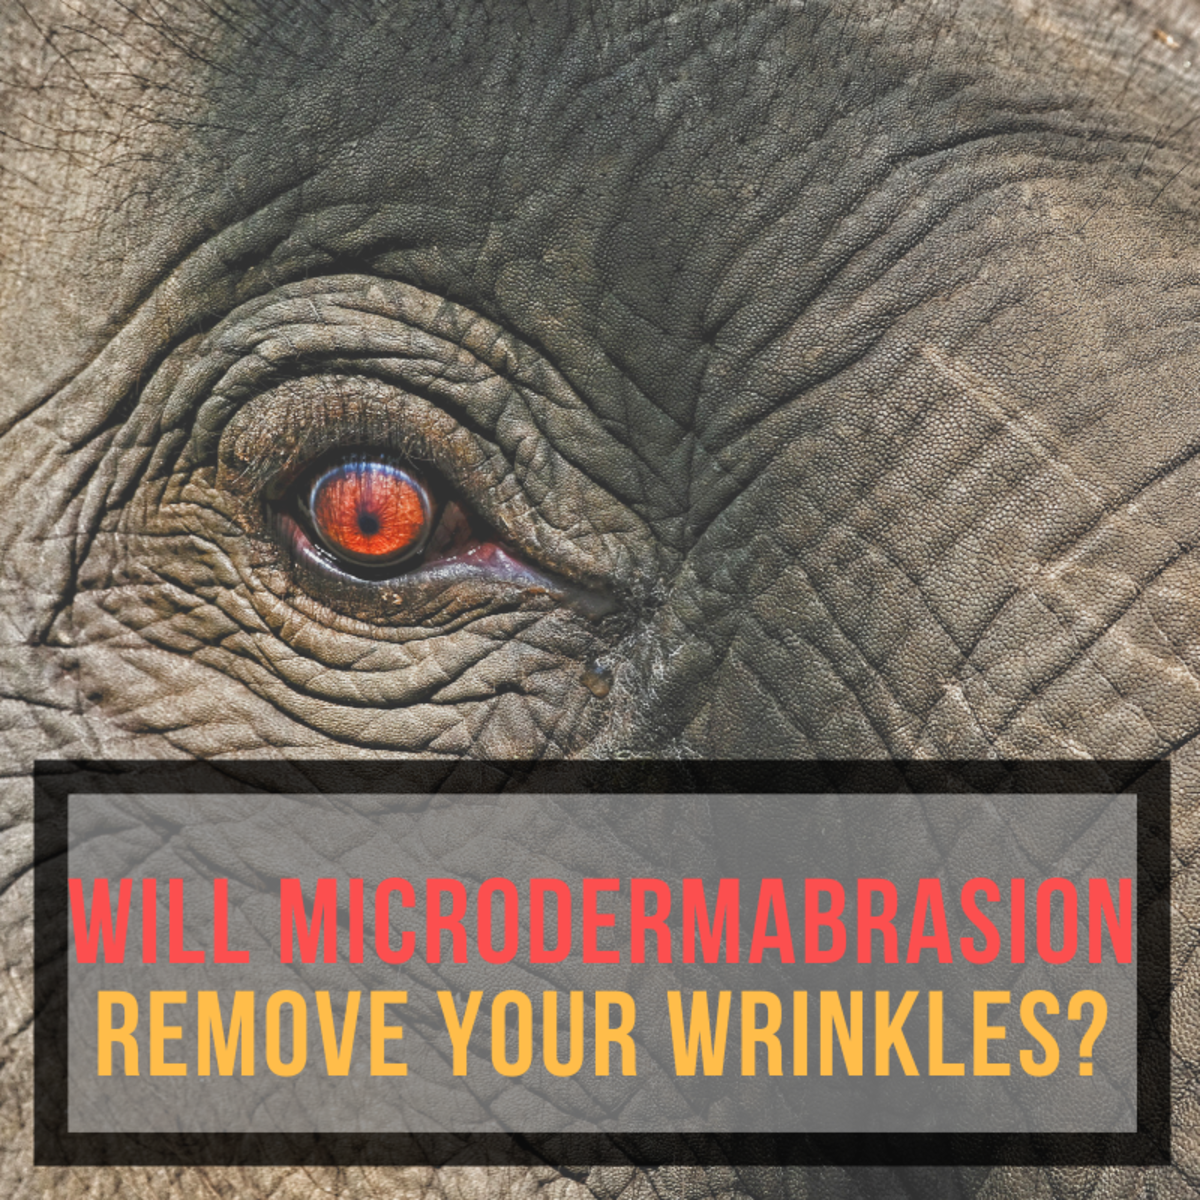 Will Microdermabrasion Remove Your Wrinkles?